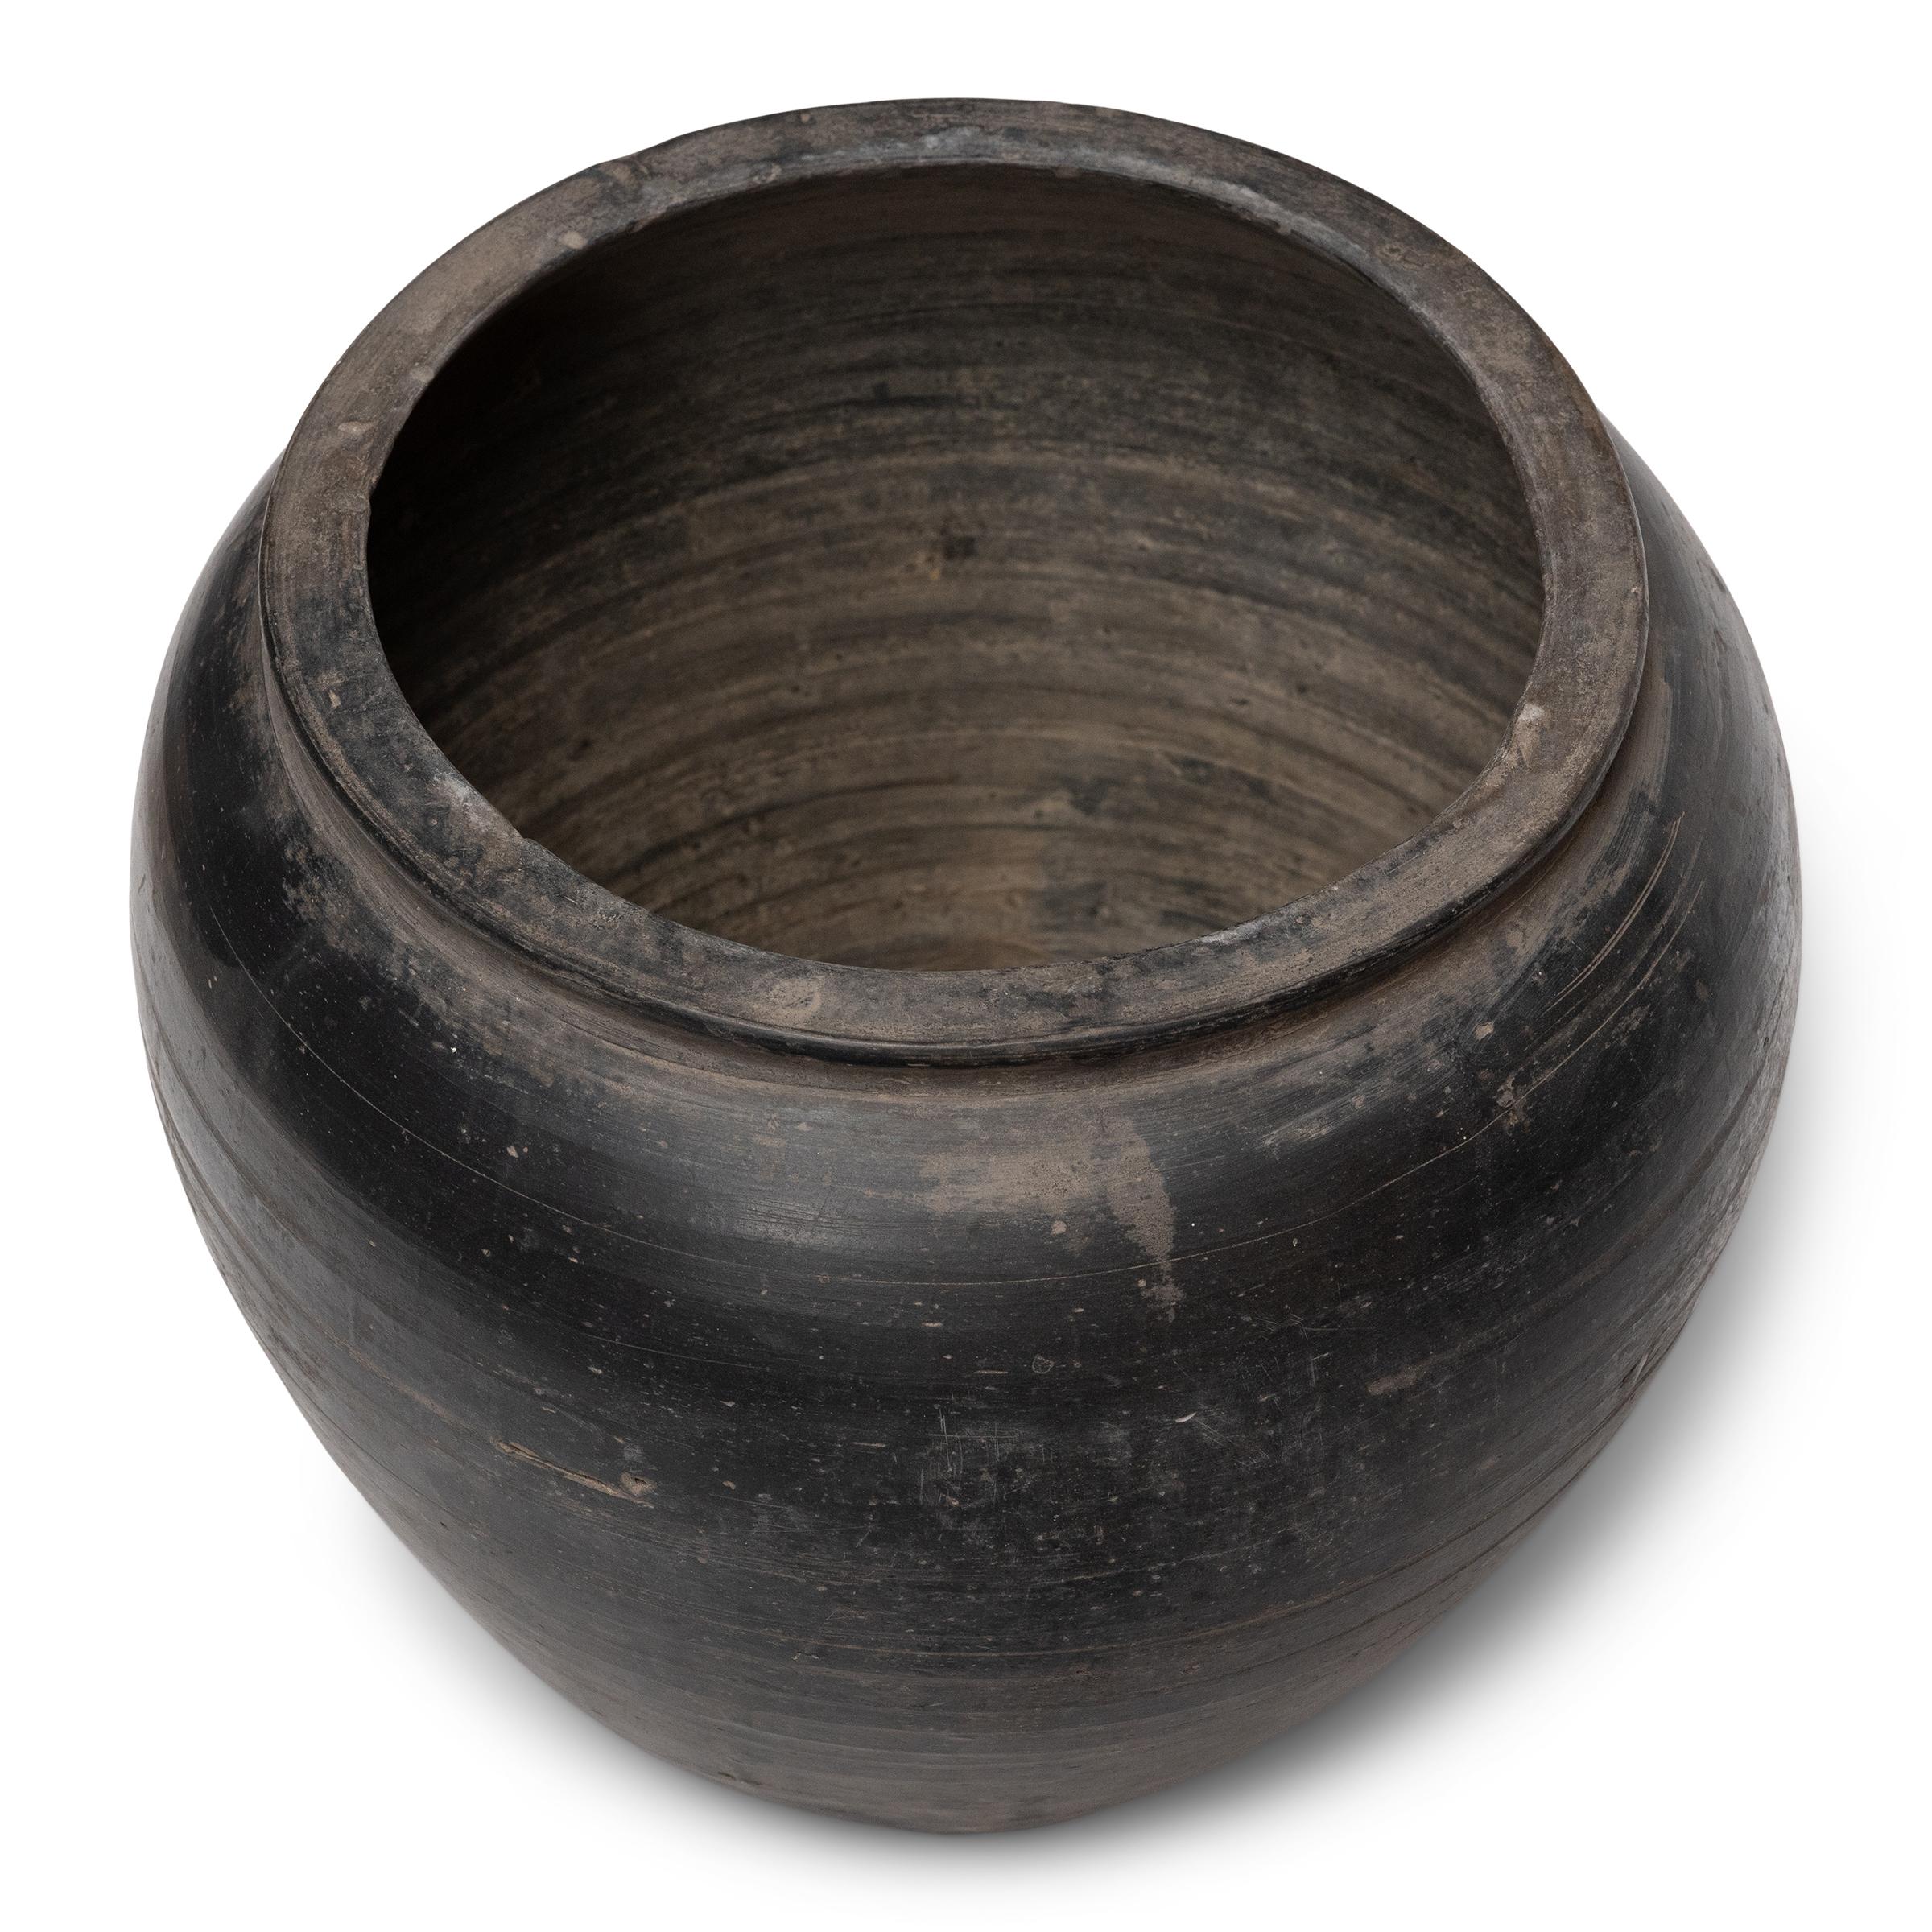 Sculpted during the early 20th century in China's Shanxi province, this terra cotta vessel has a smoky taupe-black exterior with balanced proportions and a beautifully irregular unglazed surface. Charged with the humble task of storing dry goods,